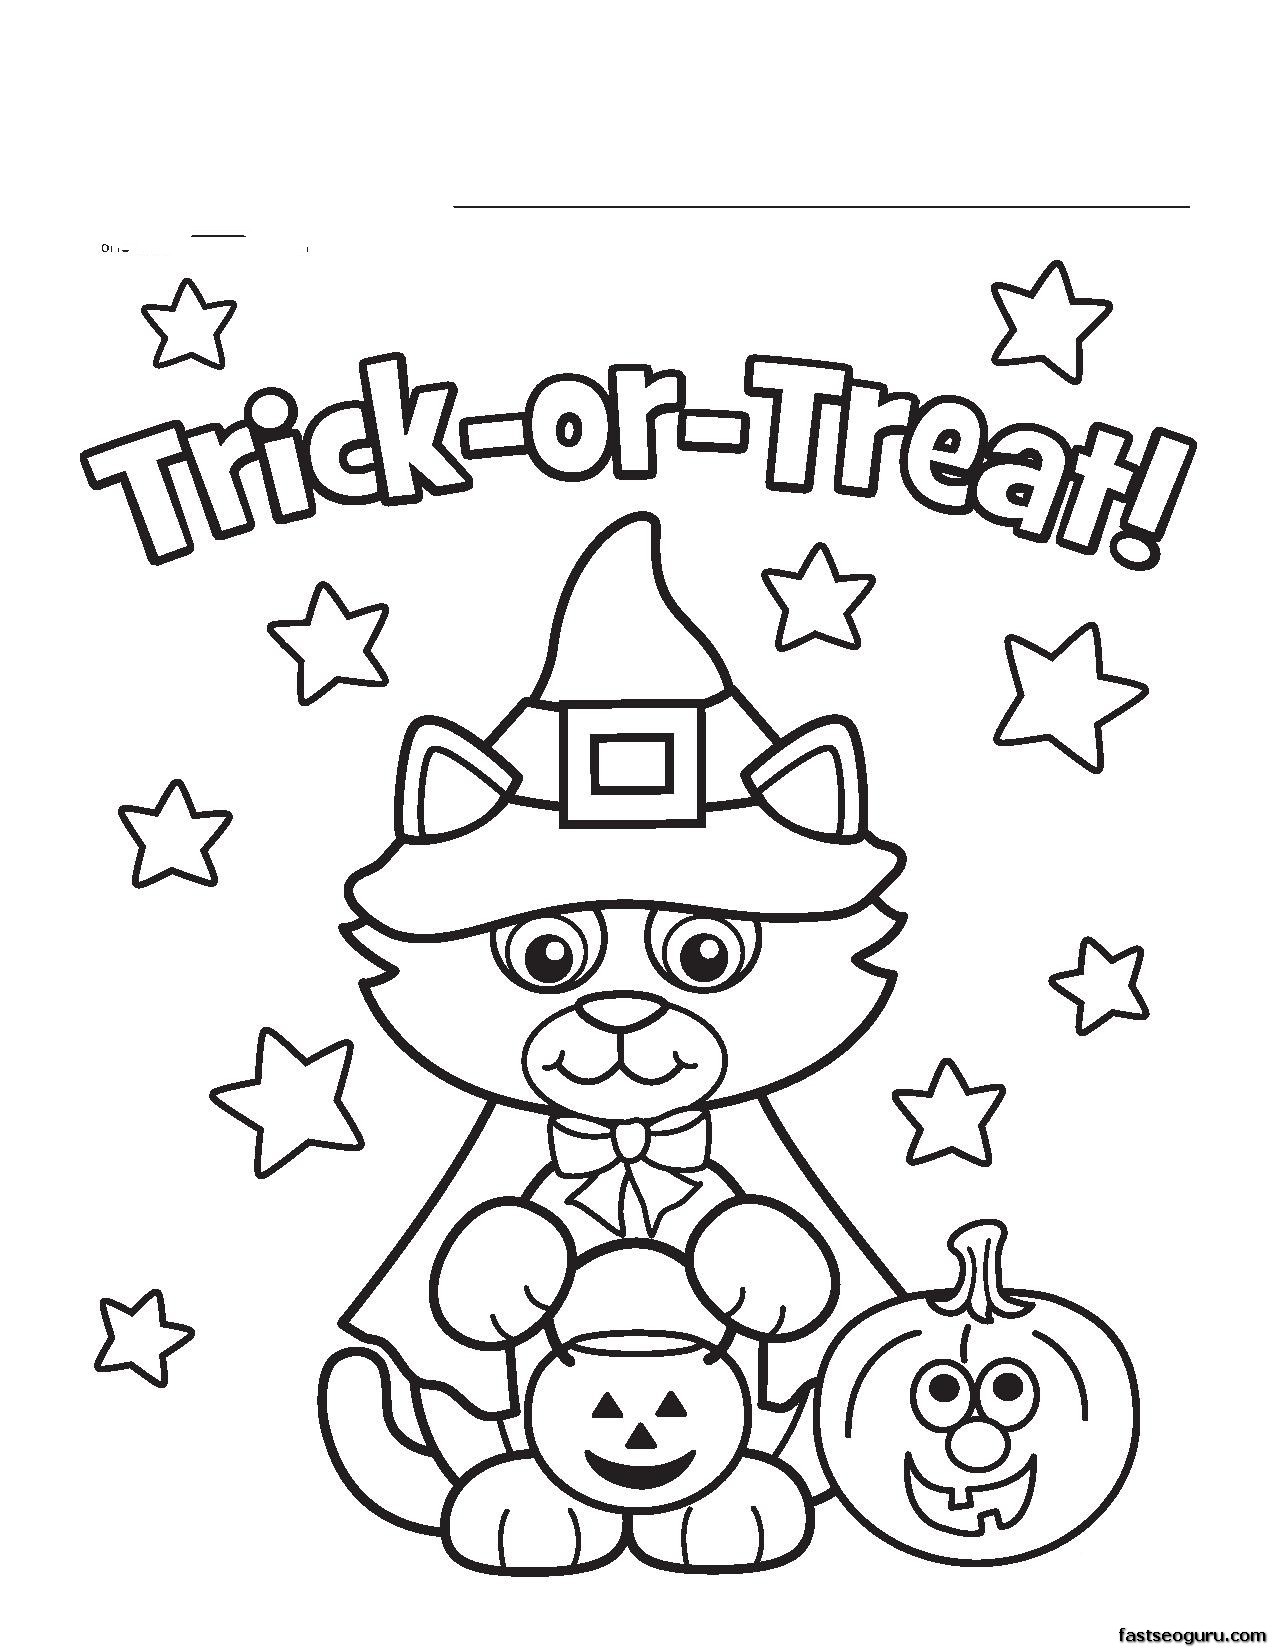 100-halloween-coloring-pages-for-kids-graphic-by-art-zone-creative